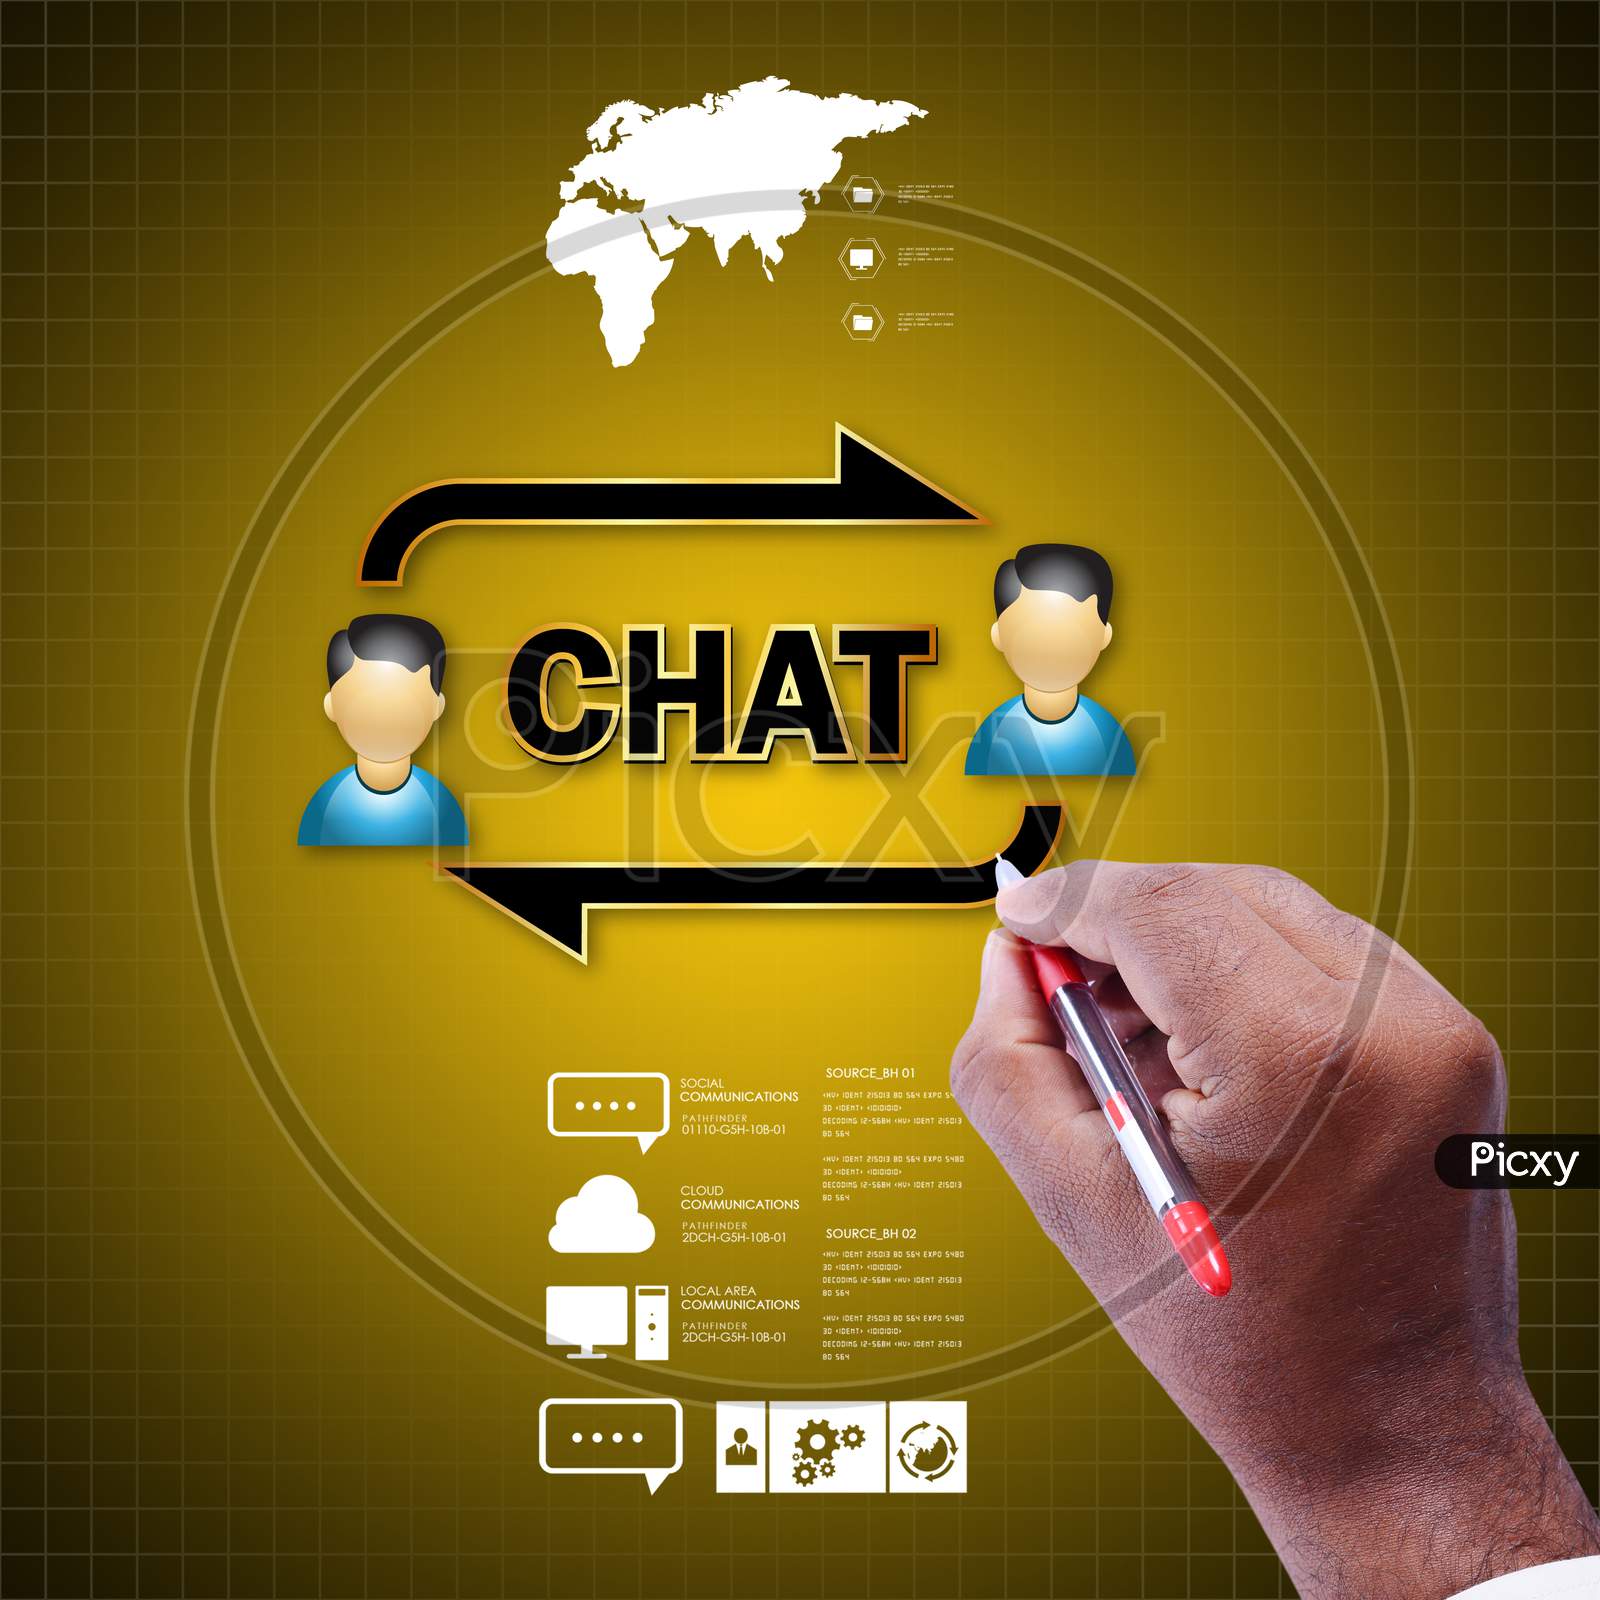 Close up shot of Person's Hand pointing towards a Chat or Conversation